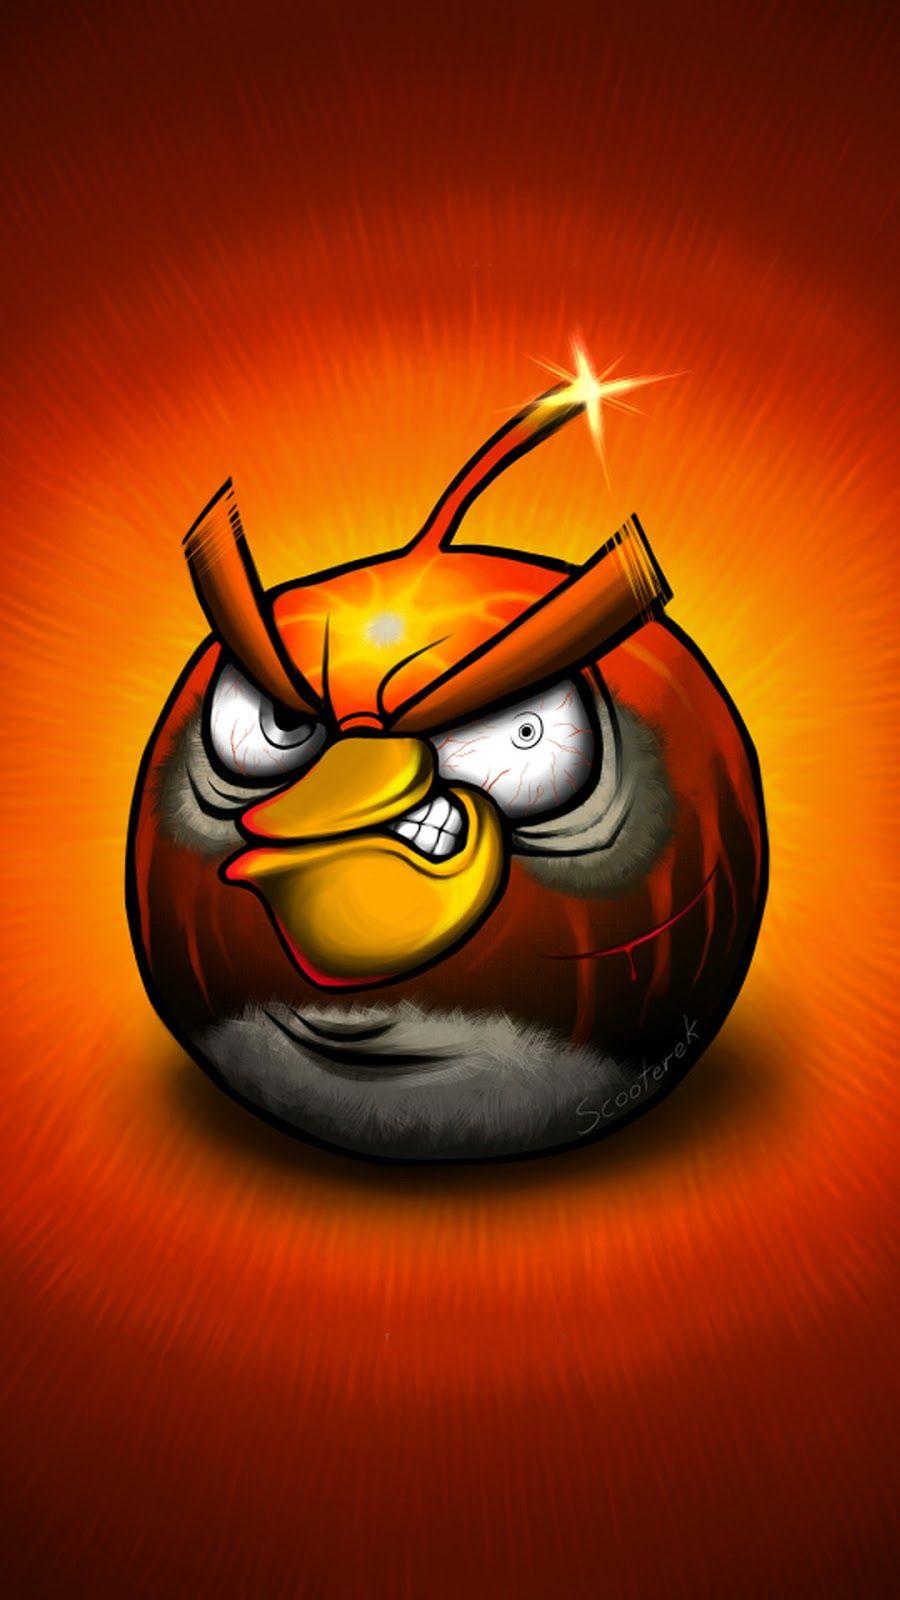 Android Wallpaper of Angry Birds. Angry birds